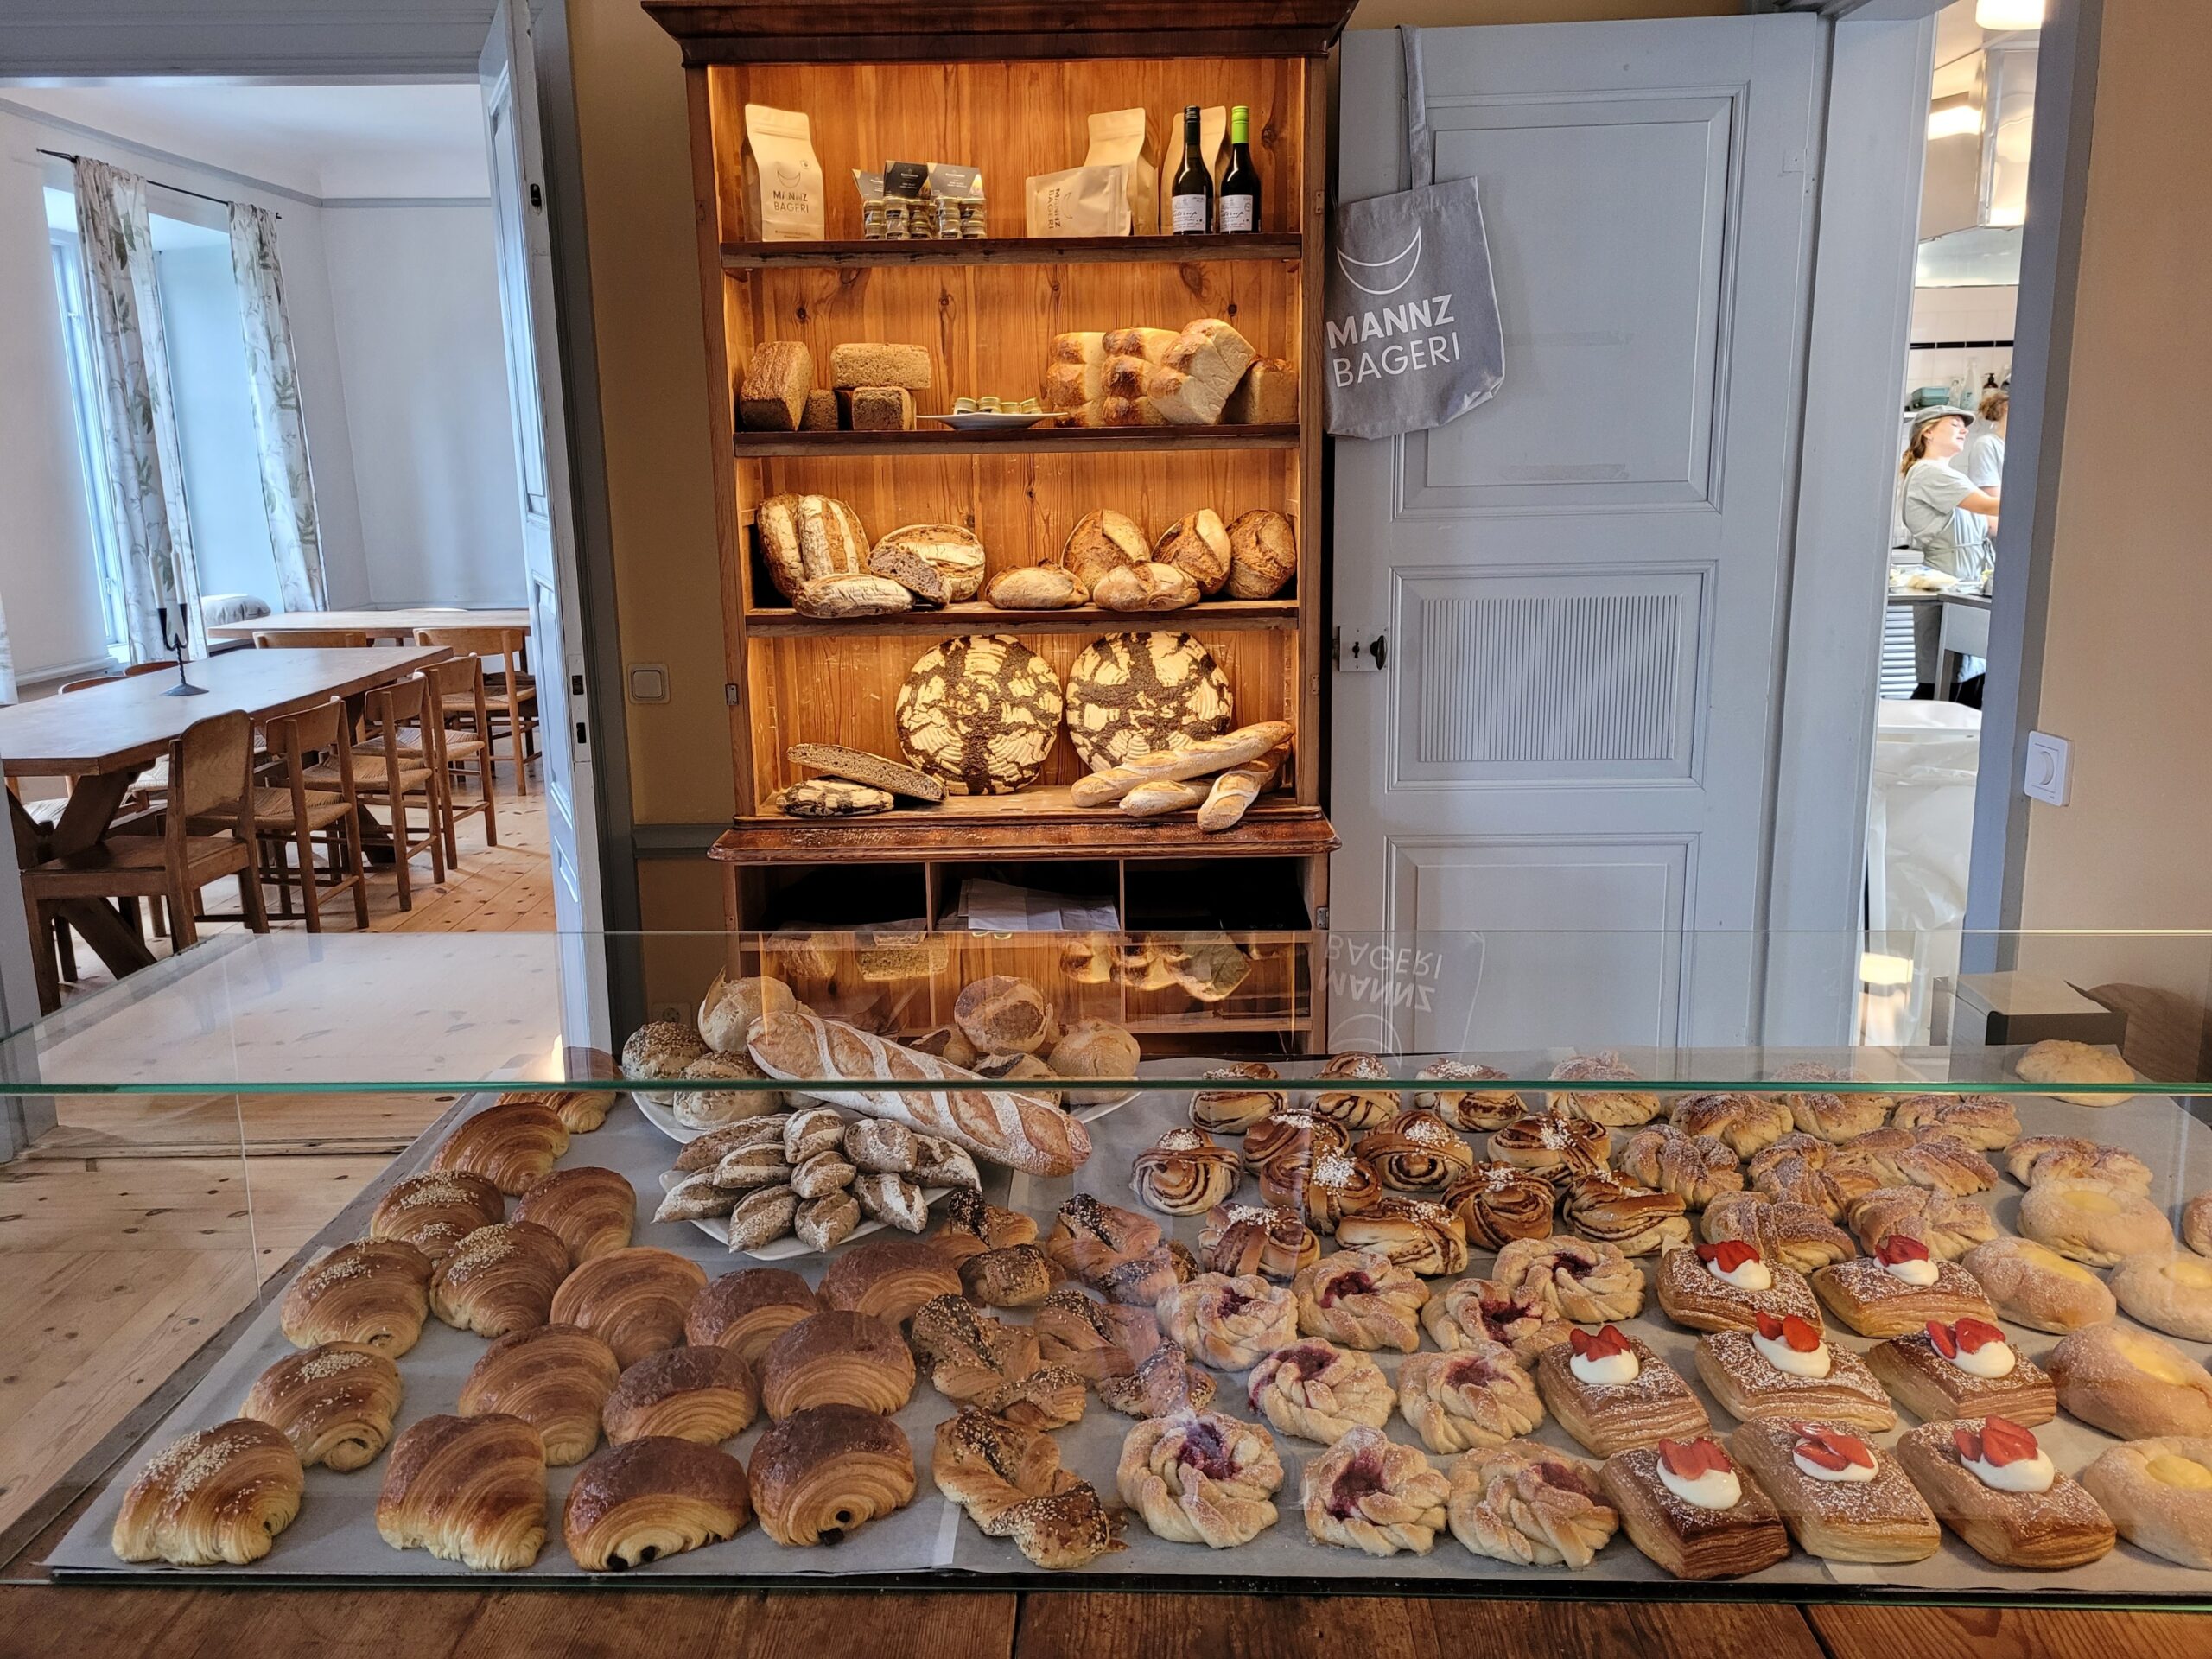 Interior from the cafe with pastries in the background. Behind a shelf with bread and to the left you can see part of the dining room.